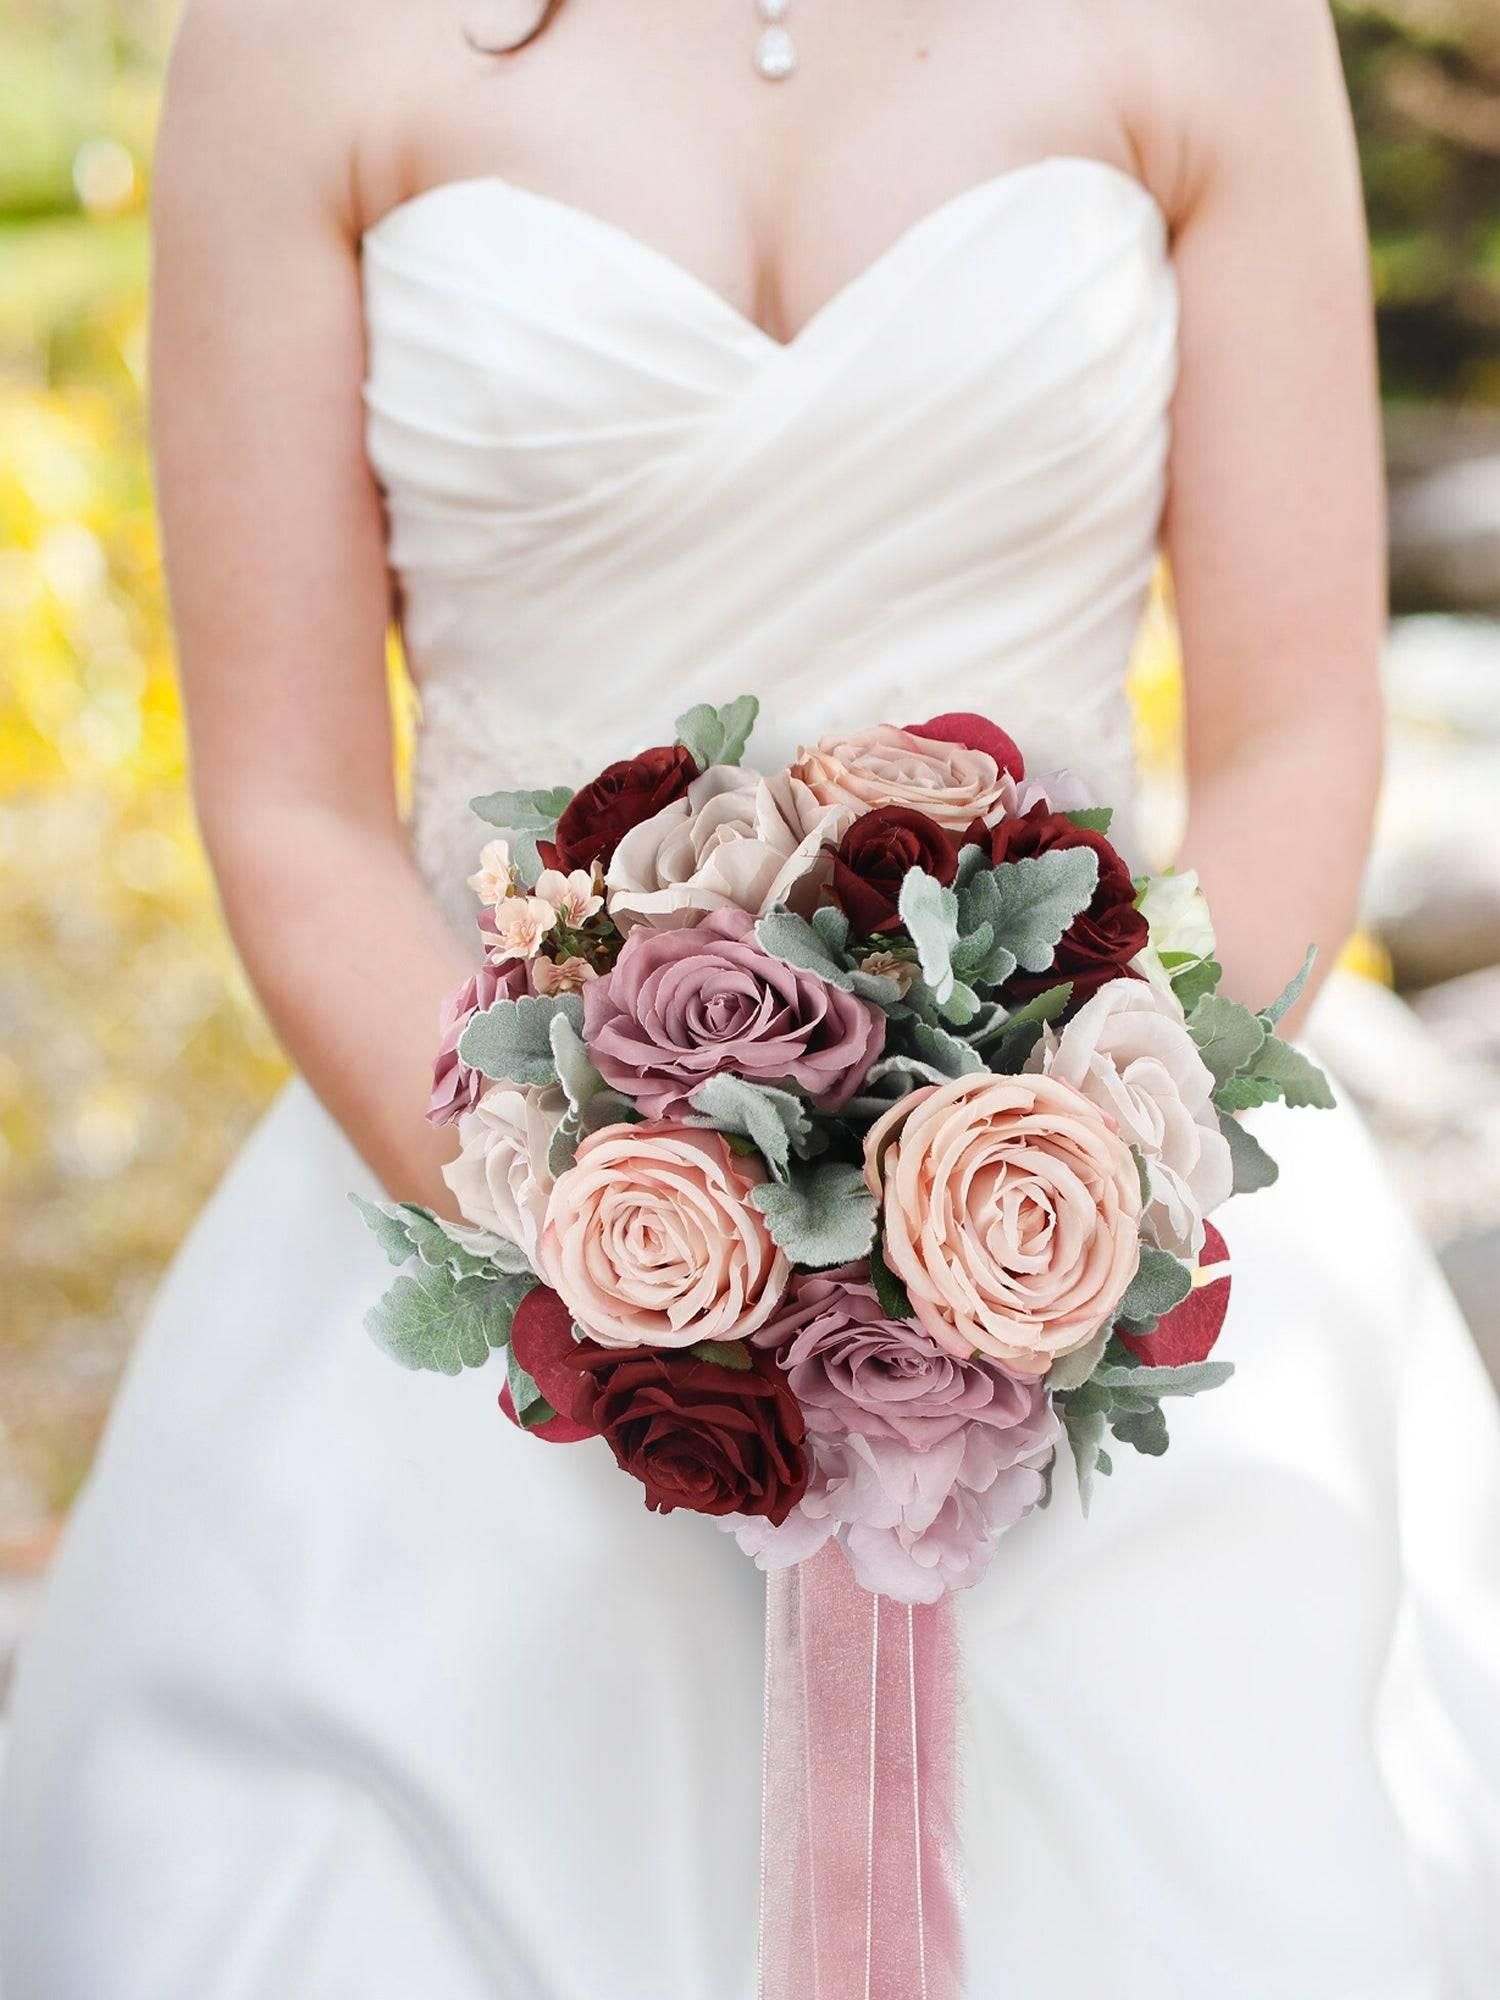 11 inch wide Dusty Rose Rounded Bridal Bouquet - Rinlong Flower